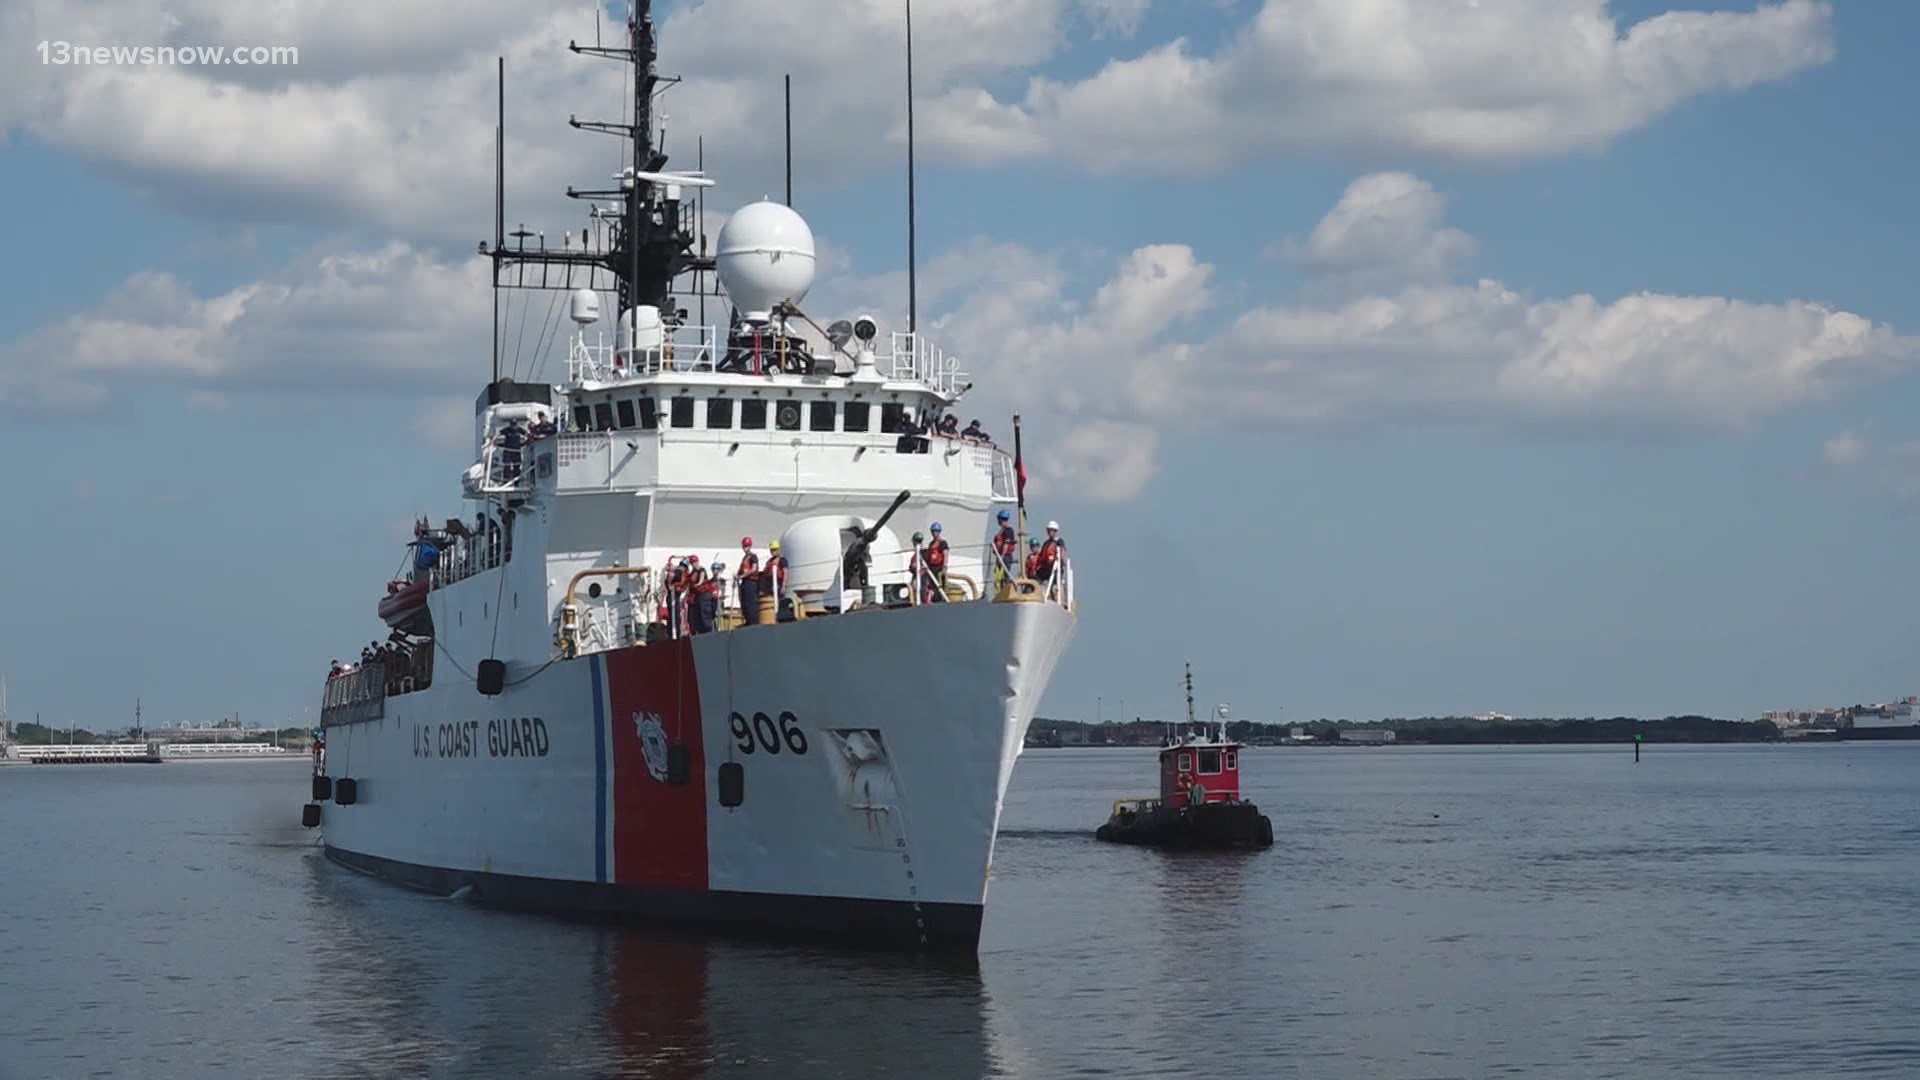 The Coast Guard said the change of homeport is to better provide service to the ships and crews in a centralized location.